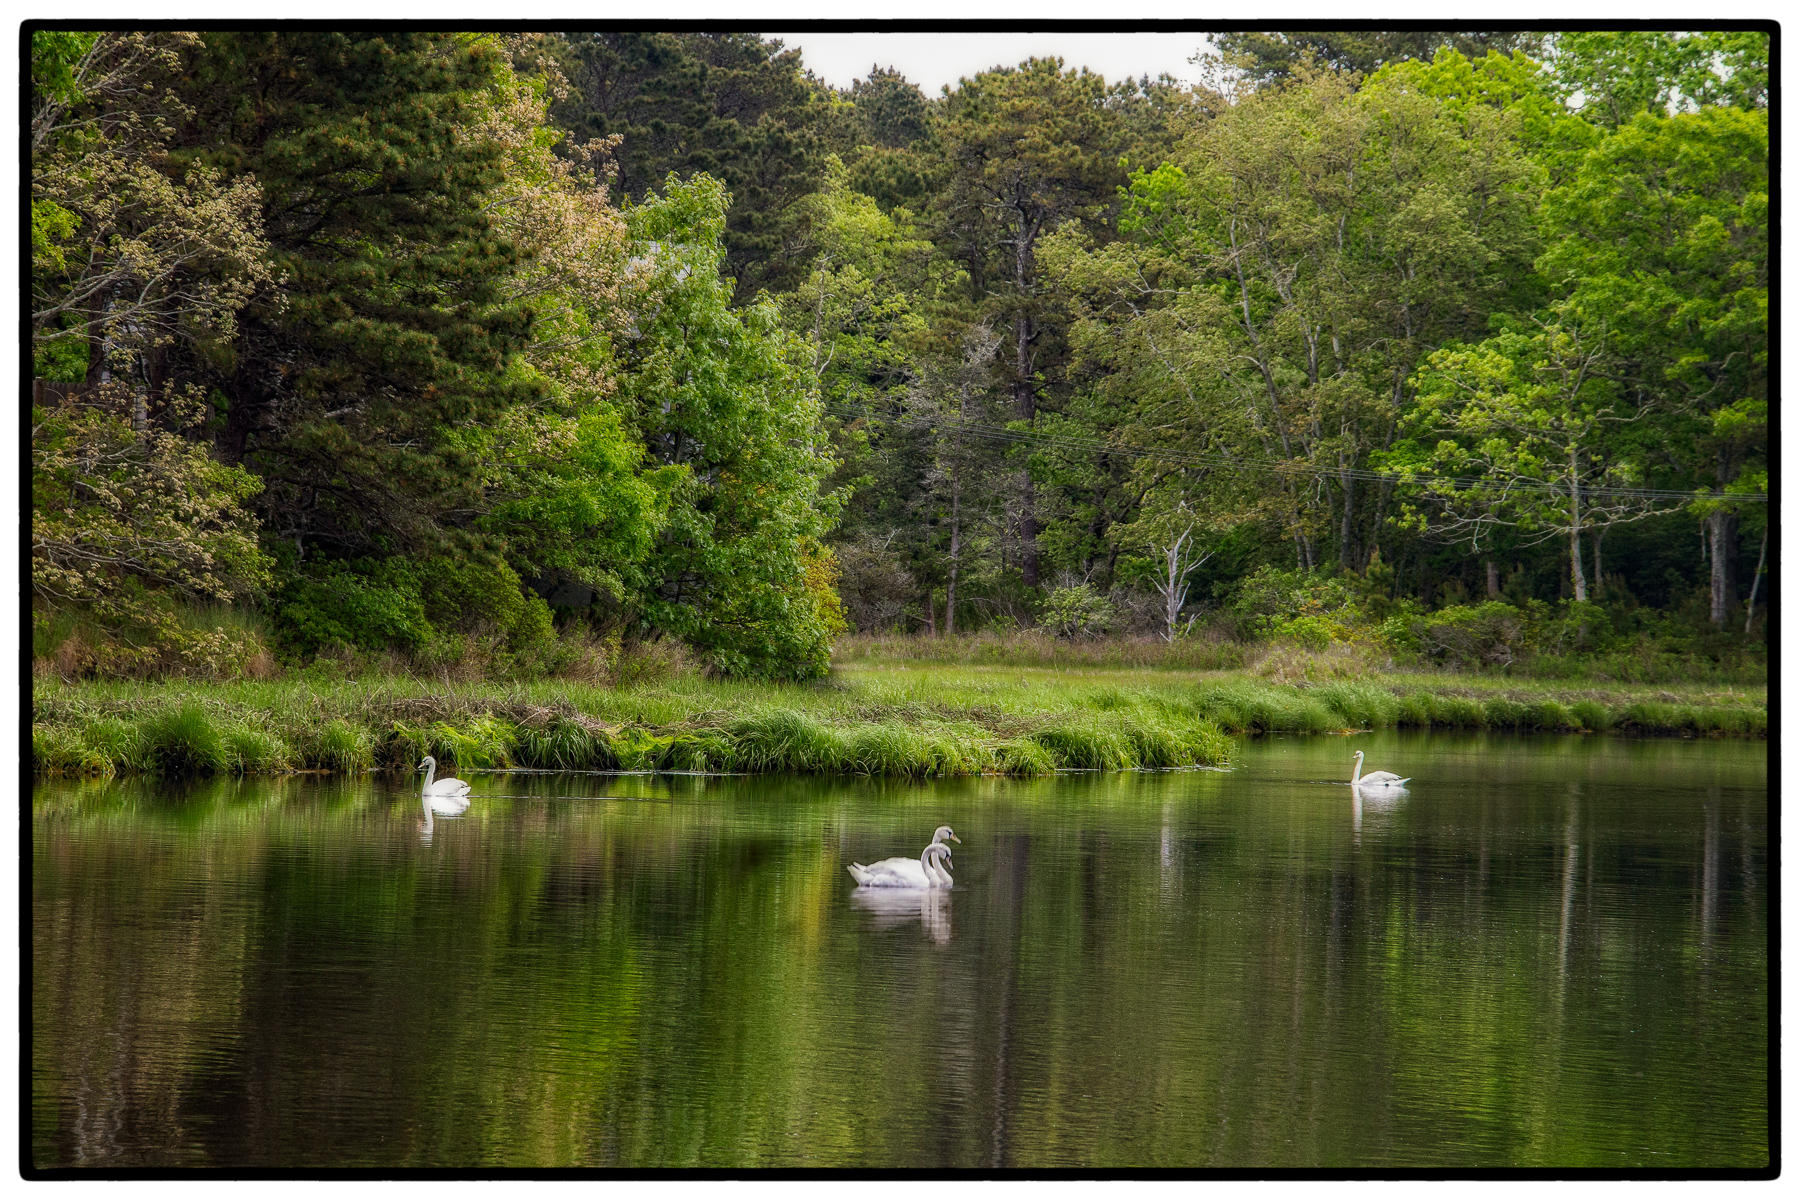 Swans by the Lady Slipper Walk, Cape Cod